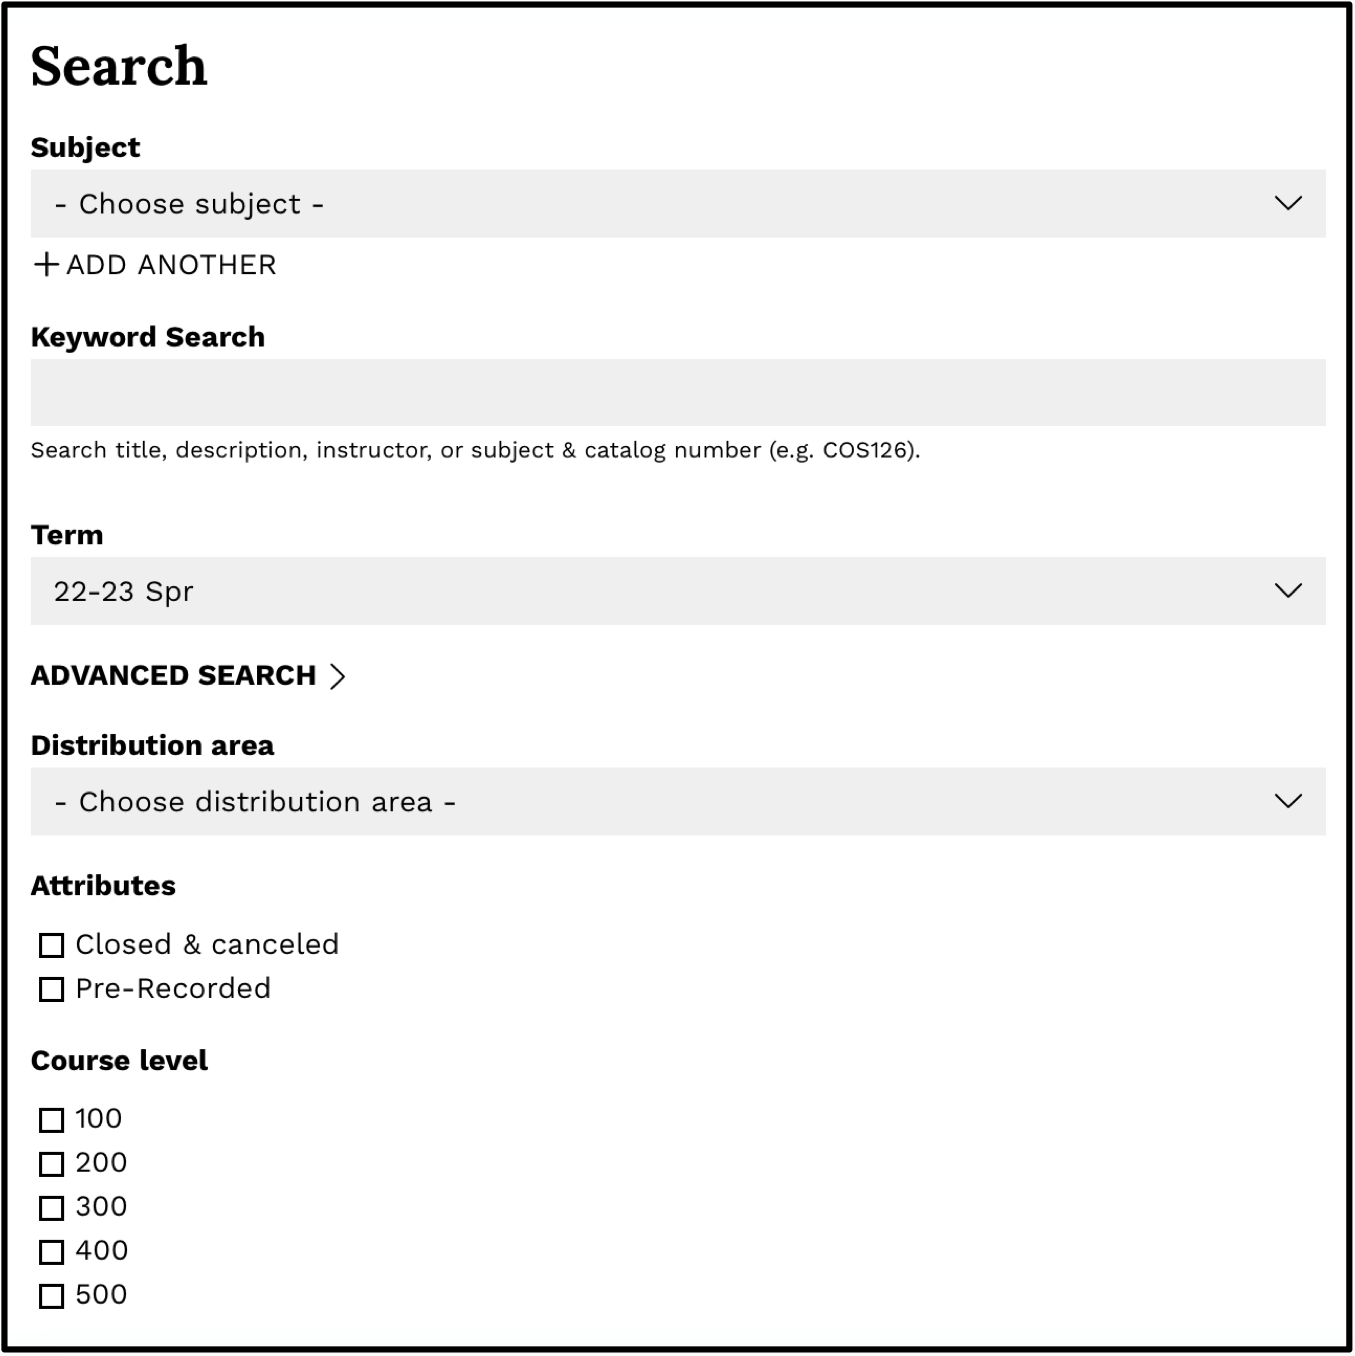 a screenshot of the search tools on the course offerings website